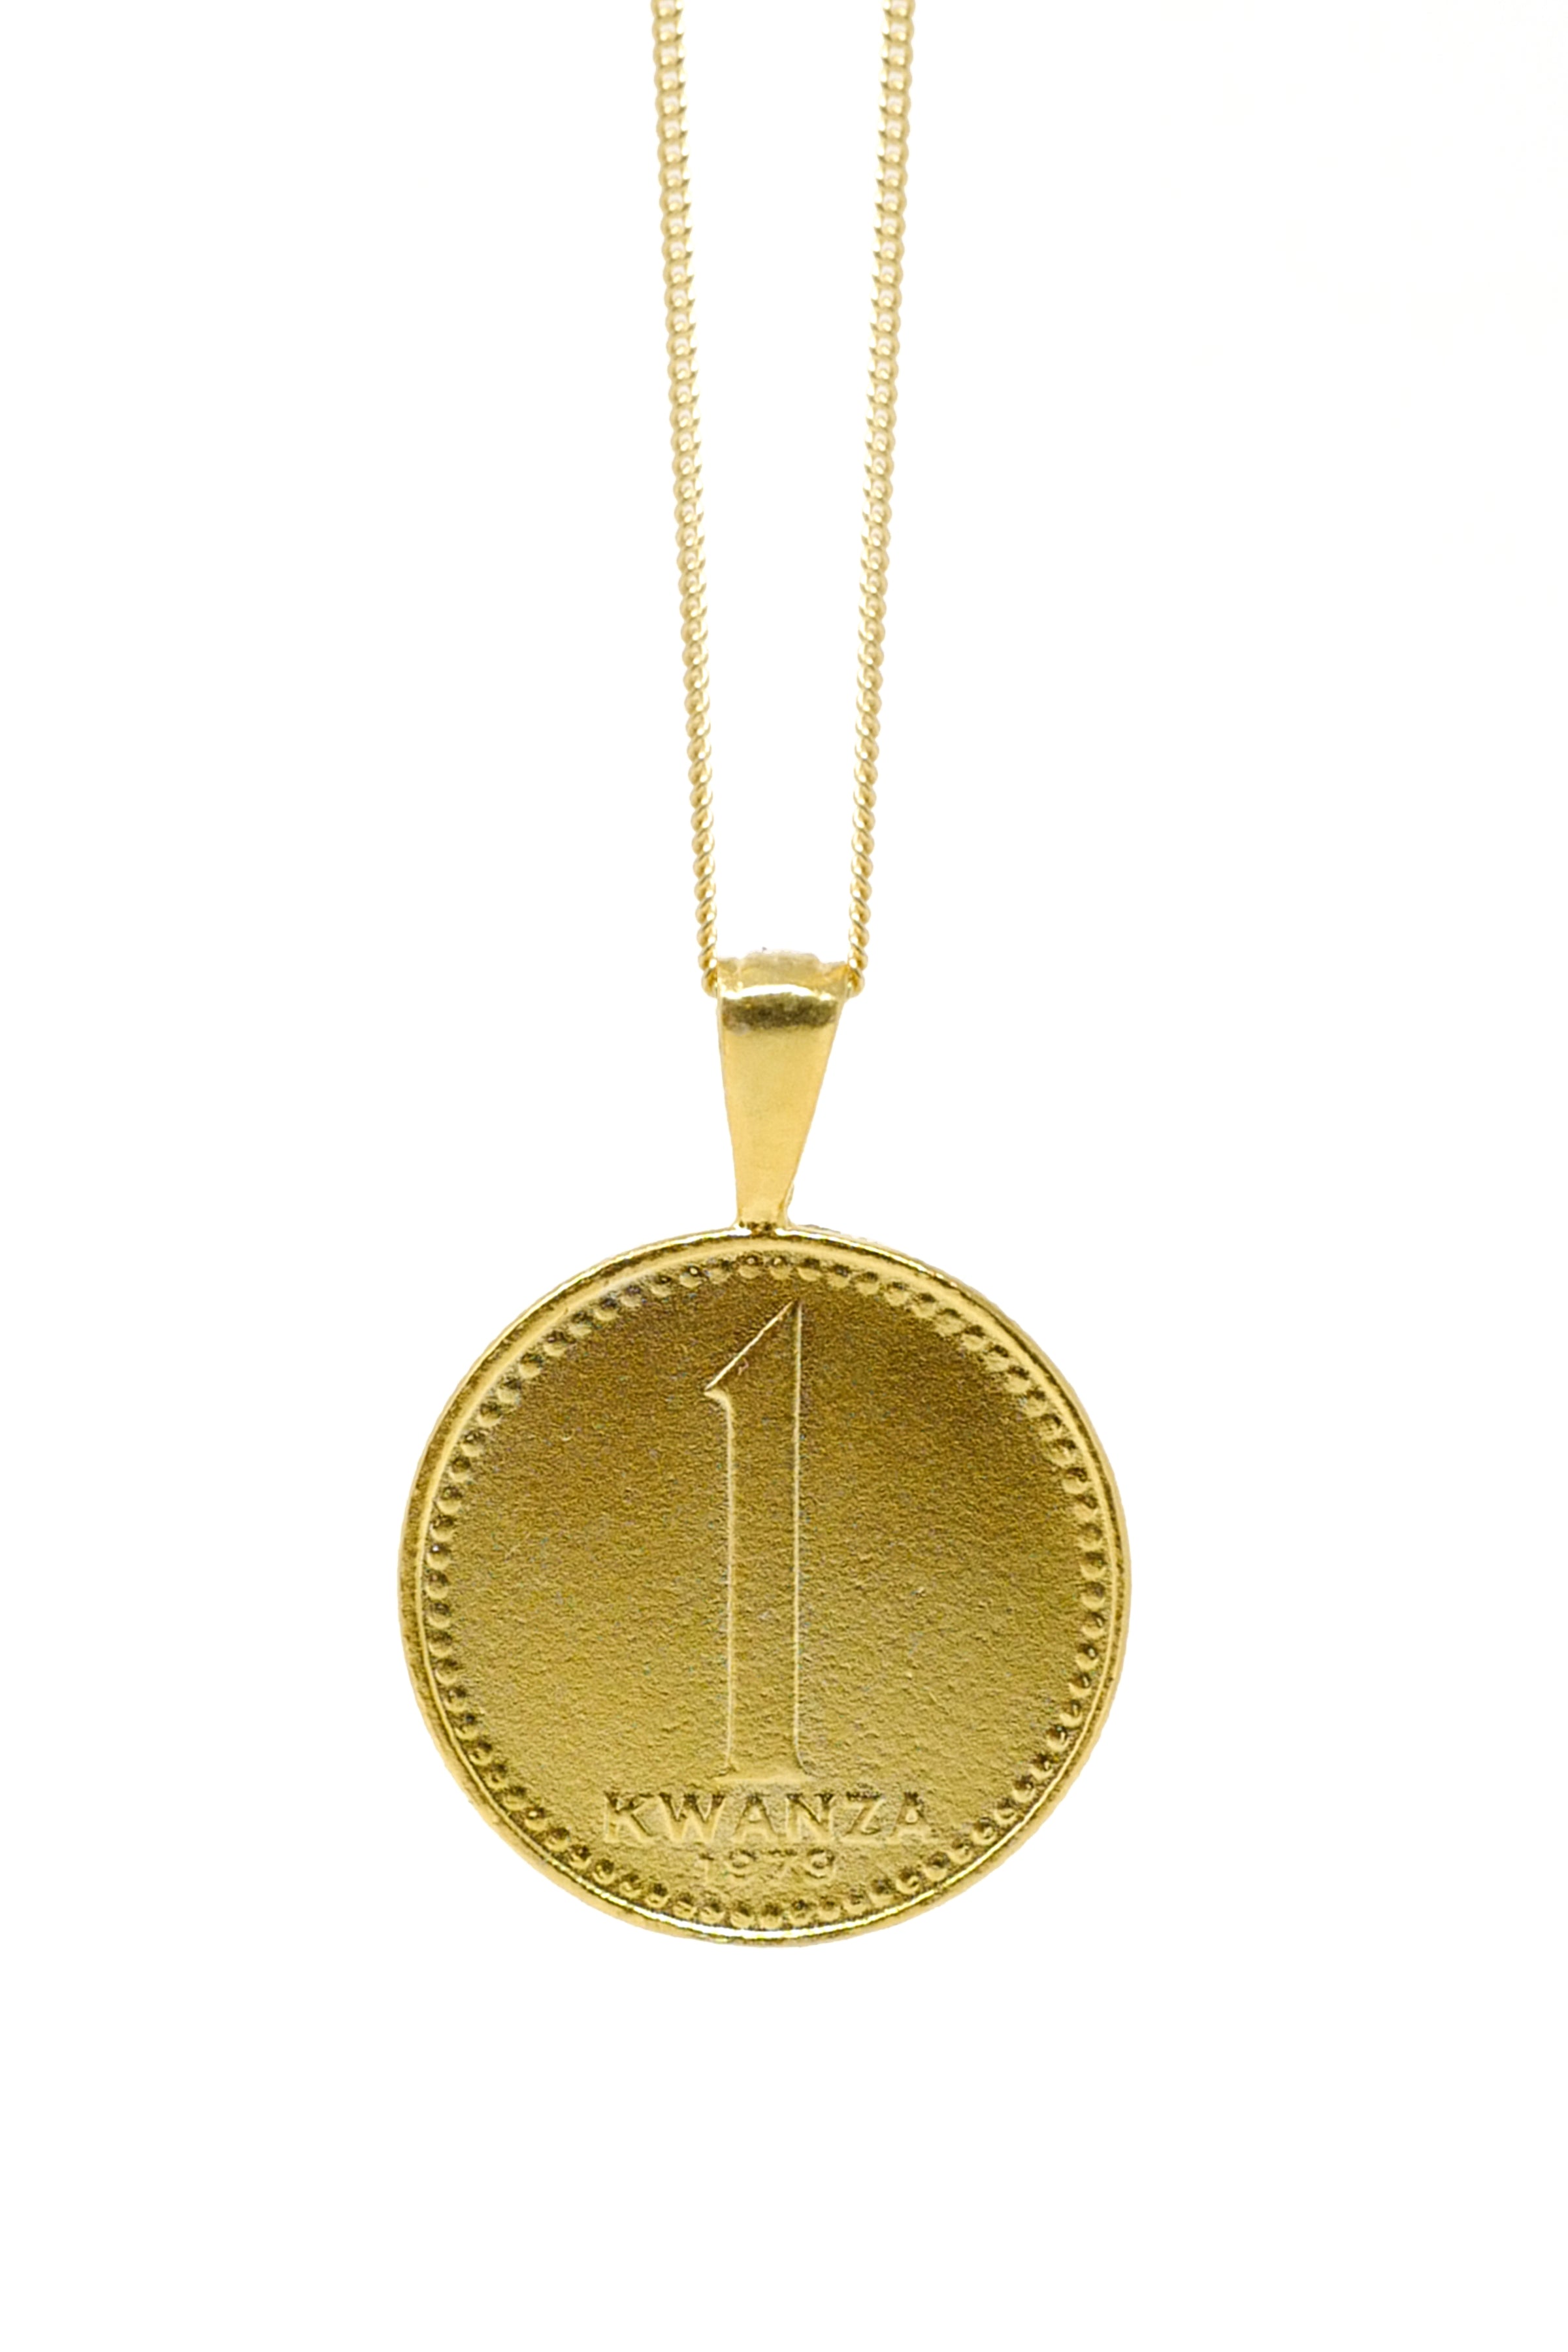 THE ANGOLA Kwanza Coin Necklace – omiwoods